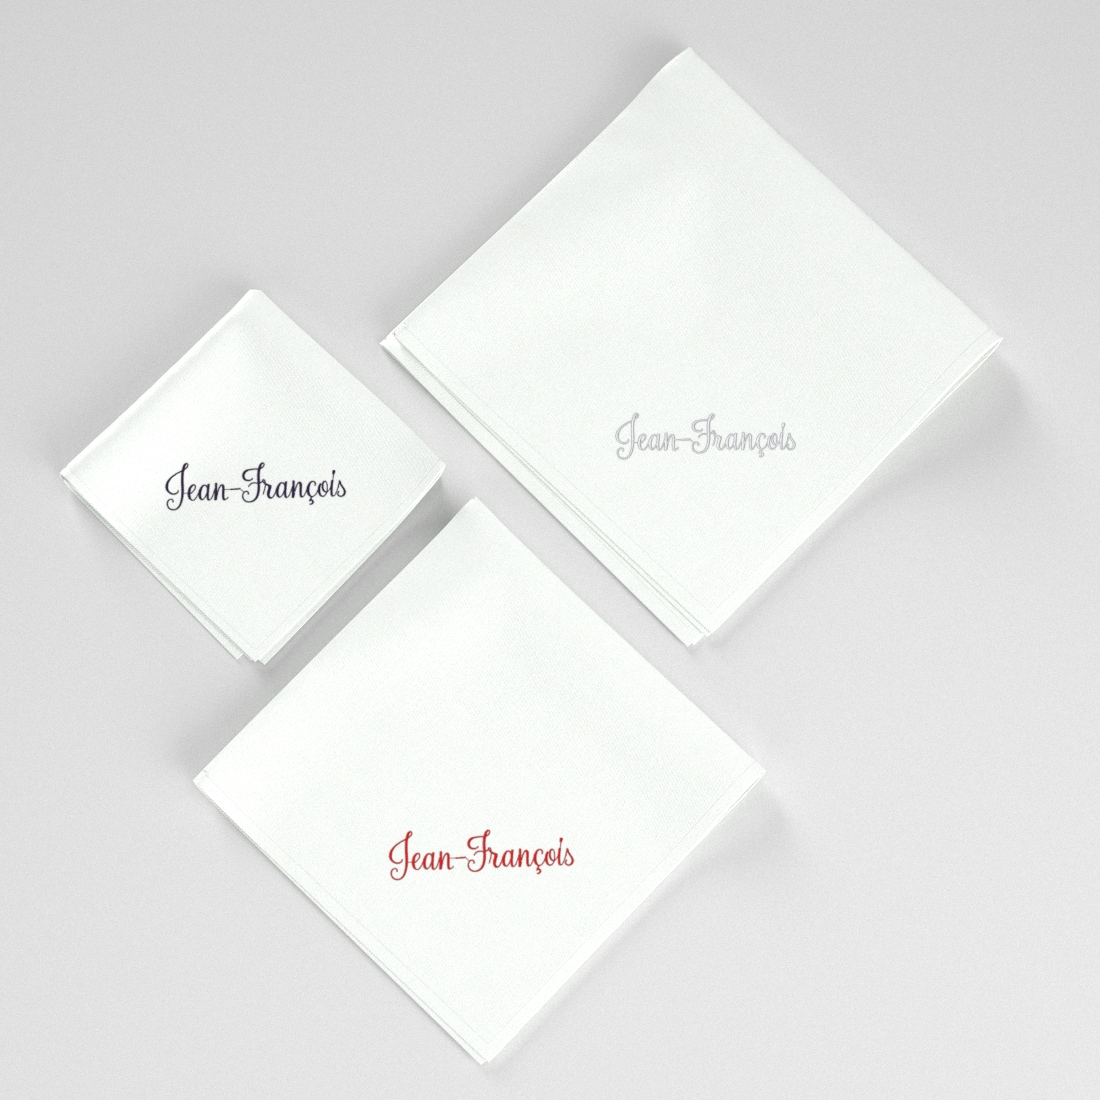 Personalized organic handkerchiefs Embroidered and Pade in Paris France by Philipp Gaber since 2009